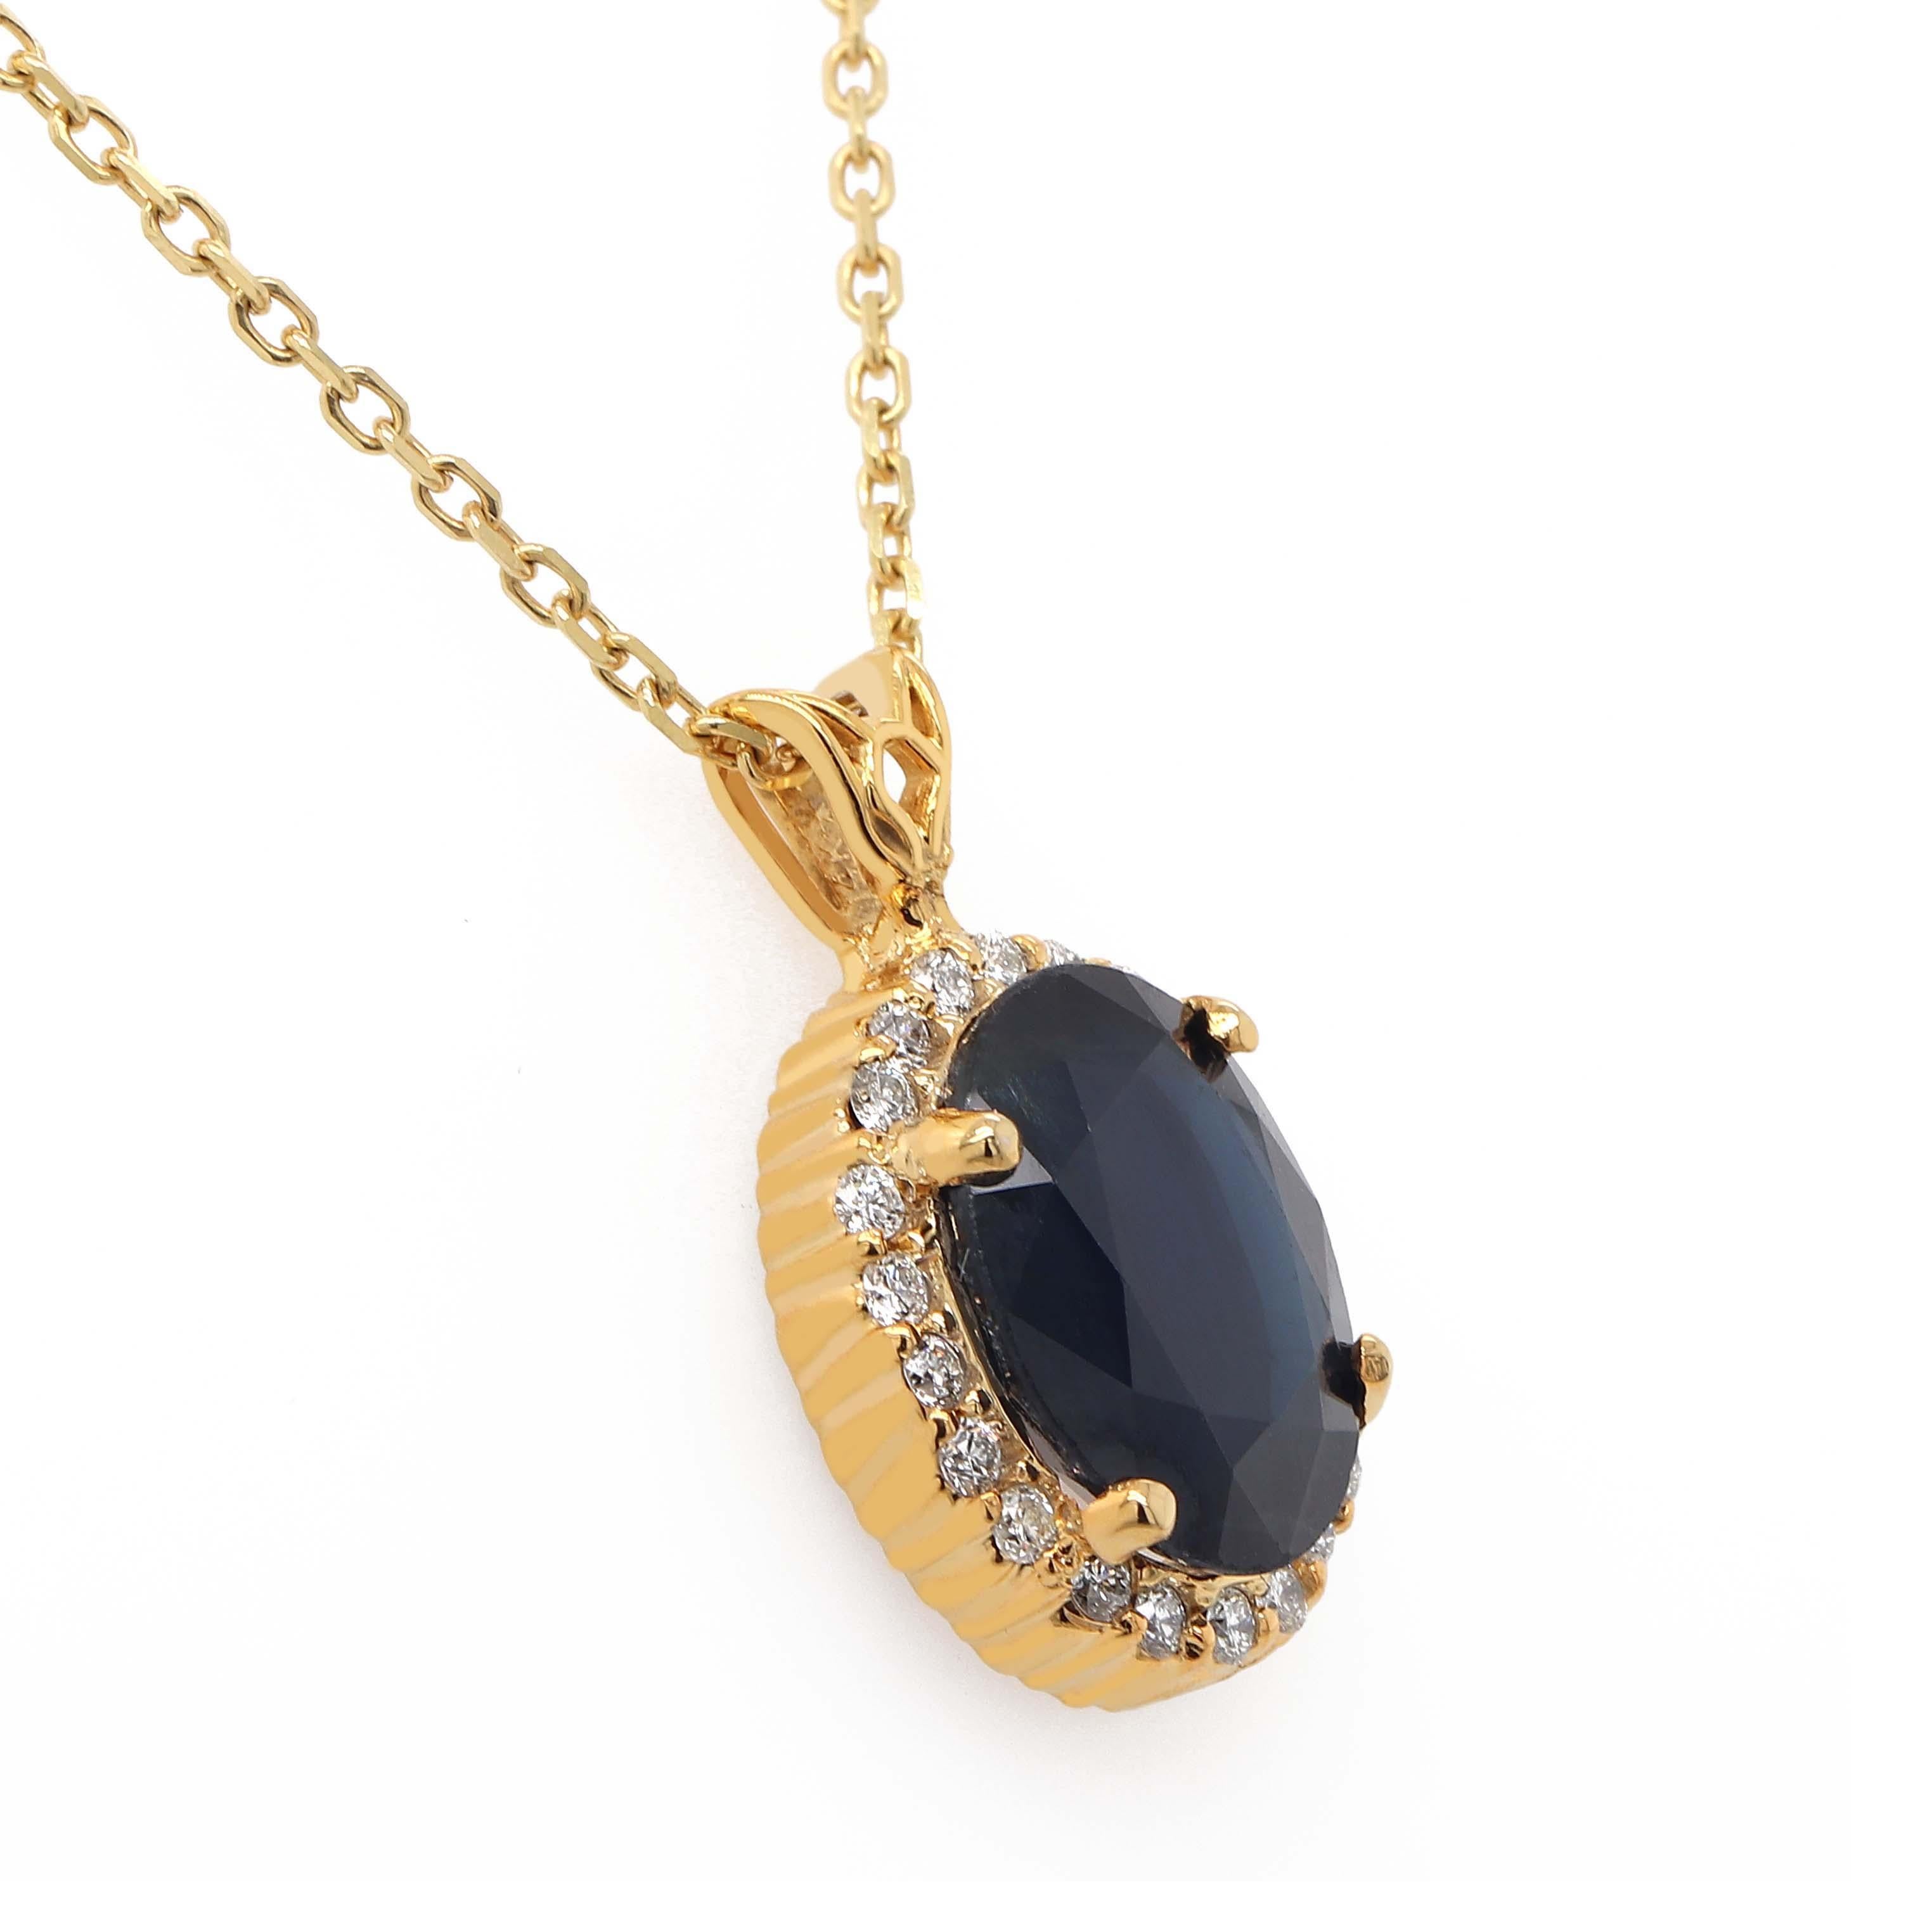 Pendant with one blue oval sapphire of about 5.86 carats surrounded by 22 round brilliant cut diamonds of about 0.39 carats with a clarity of VS and color G. All stones are sset in a 14k yellow gold pendant. Total weight of the pendant is